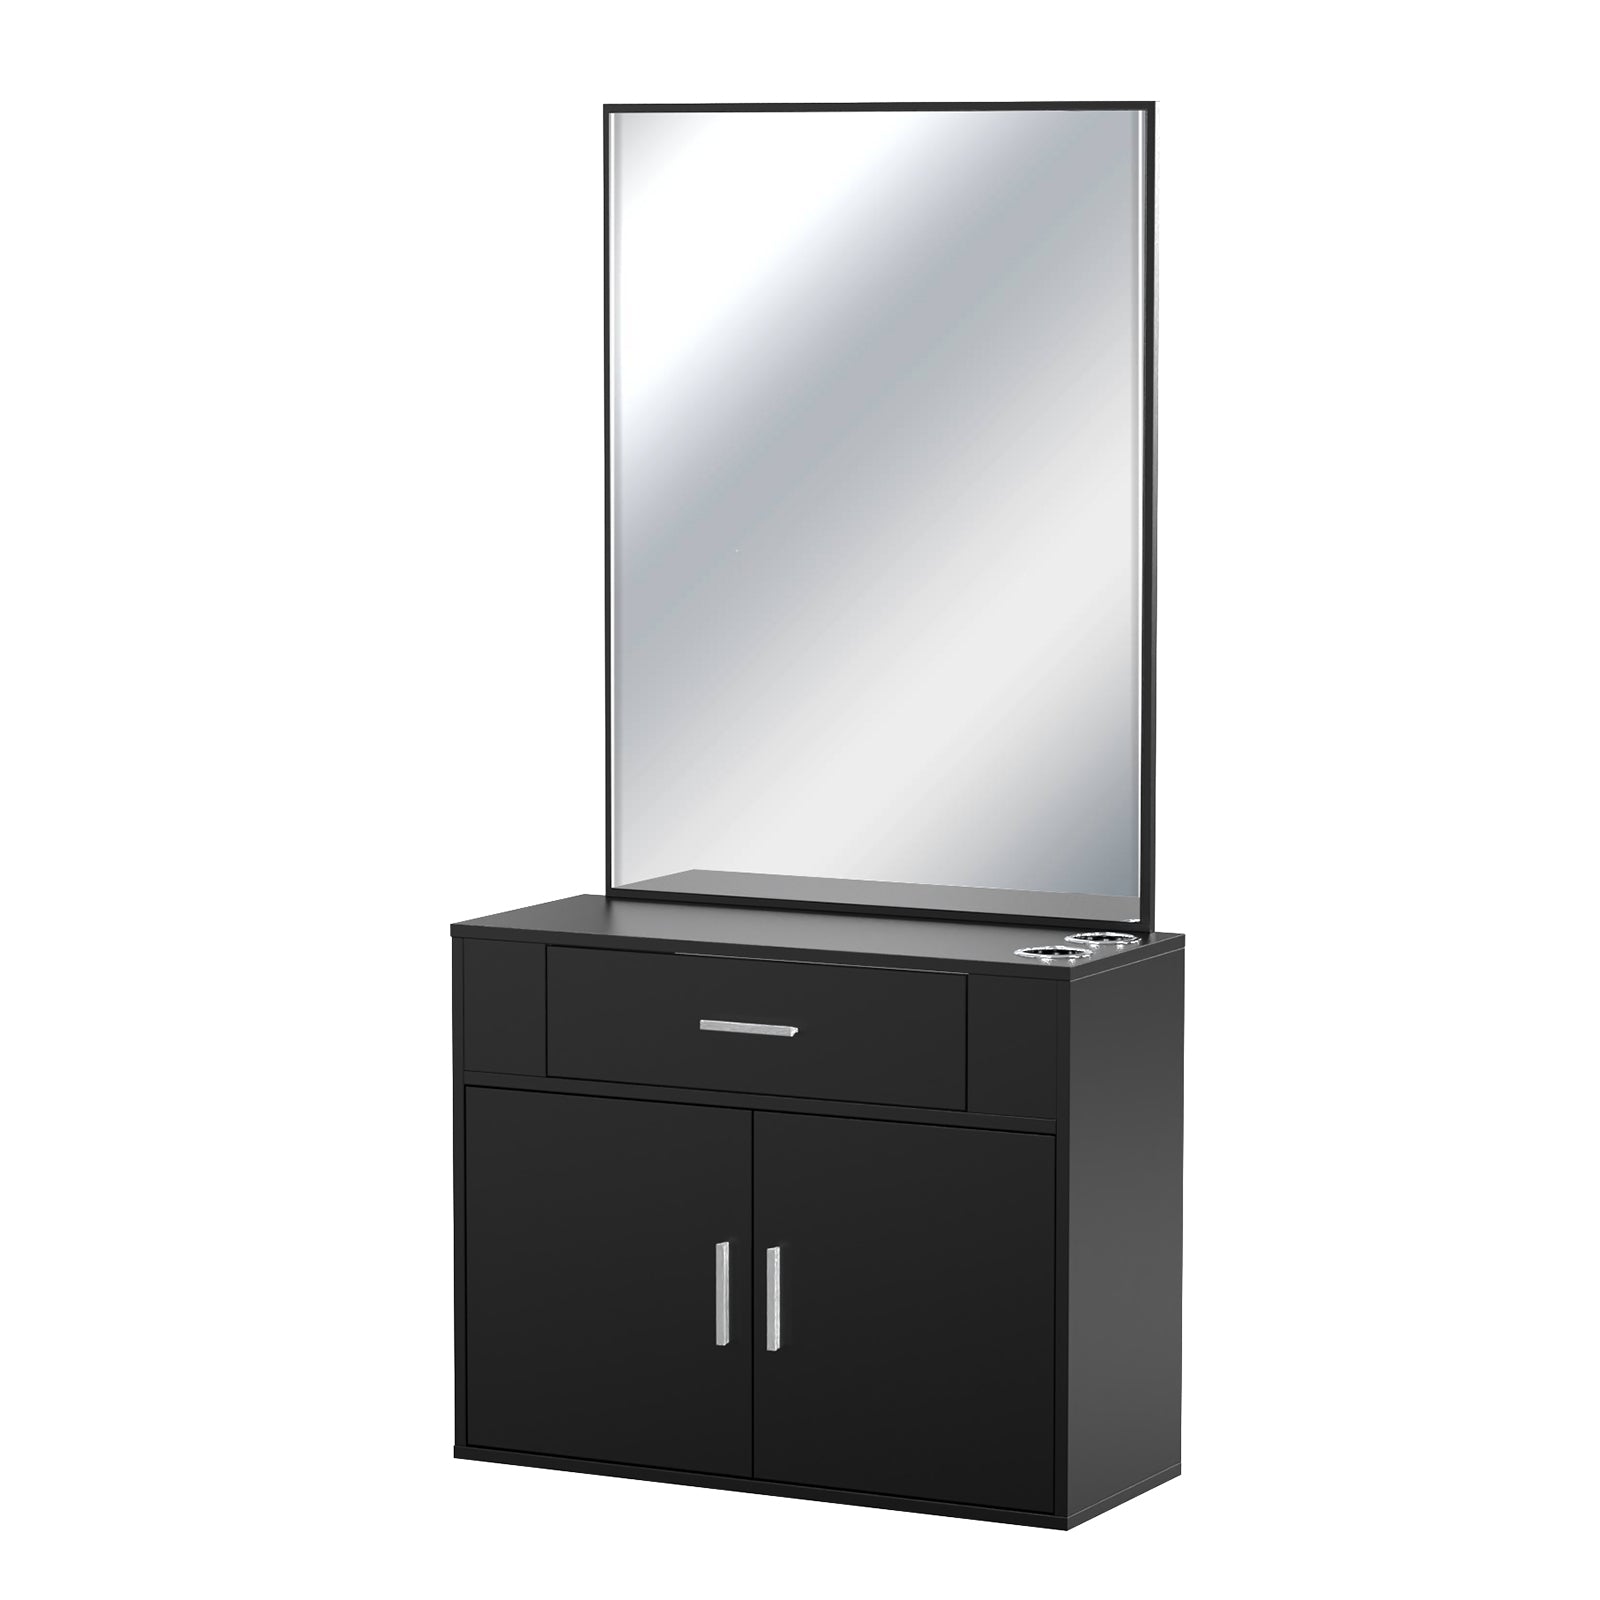 OmySalon Wall Mount Salon Station with Mirror 1 Drawer 1 Storage Cabinet 2 Hair Dryer Holders